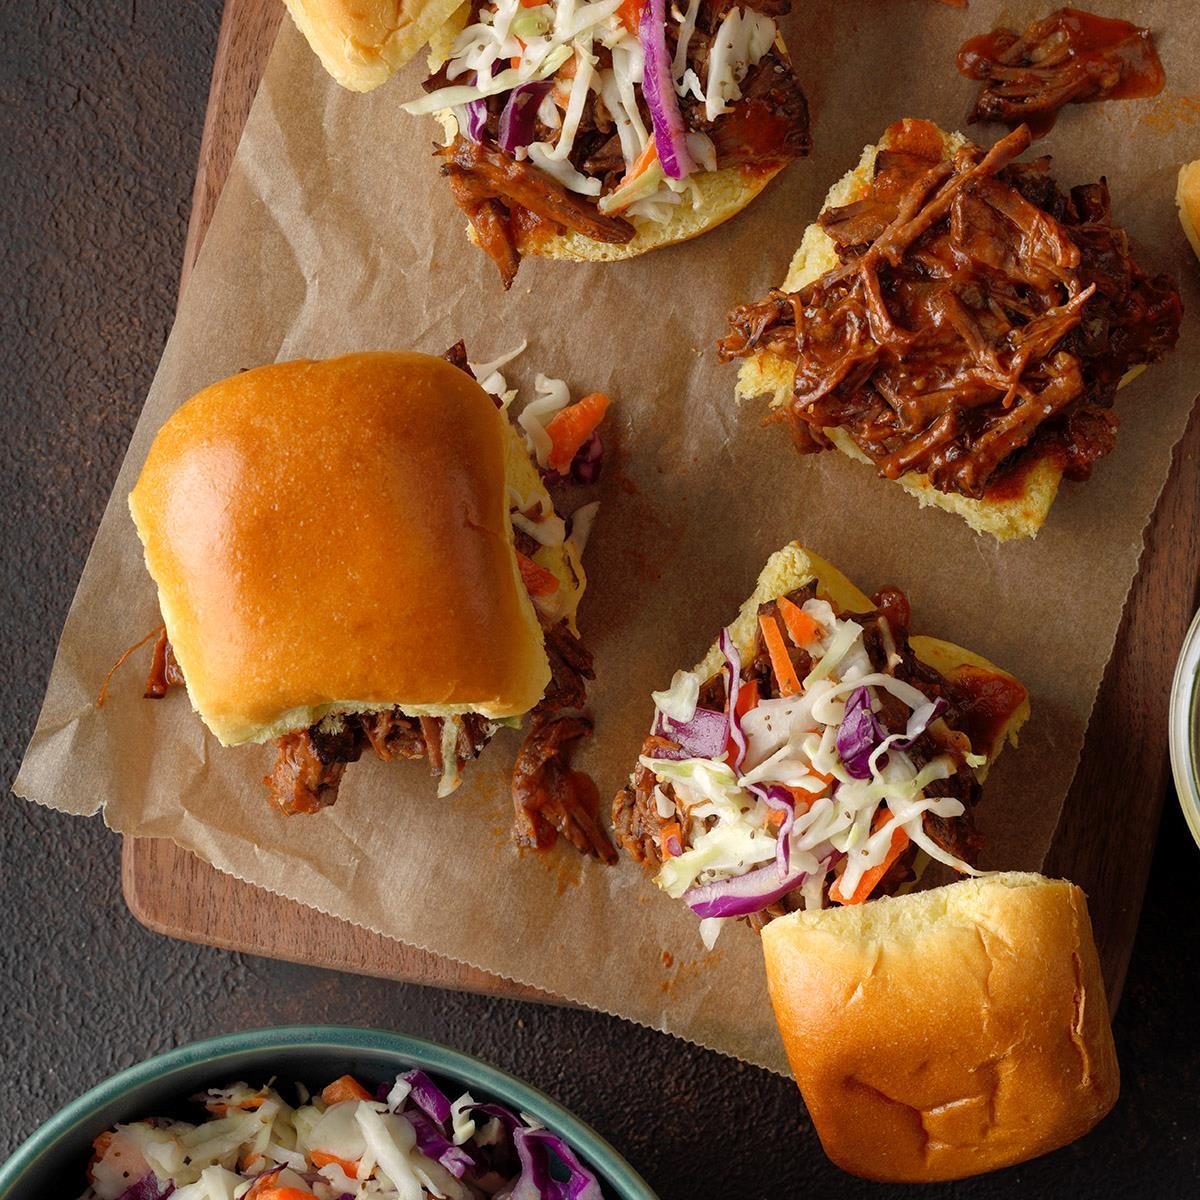 15 Crockpot Recipes For A Tailgate Party - My Home and Travels